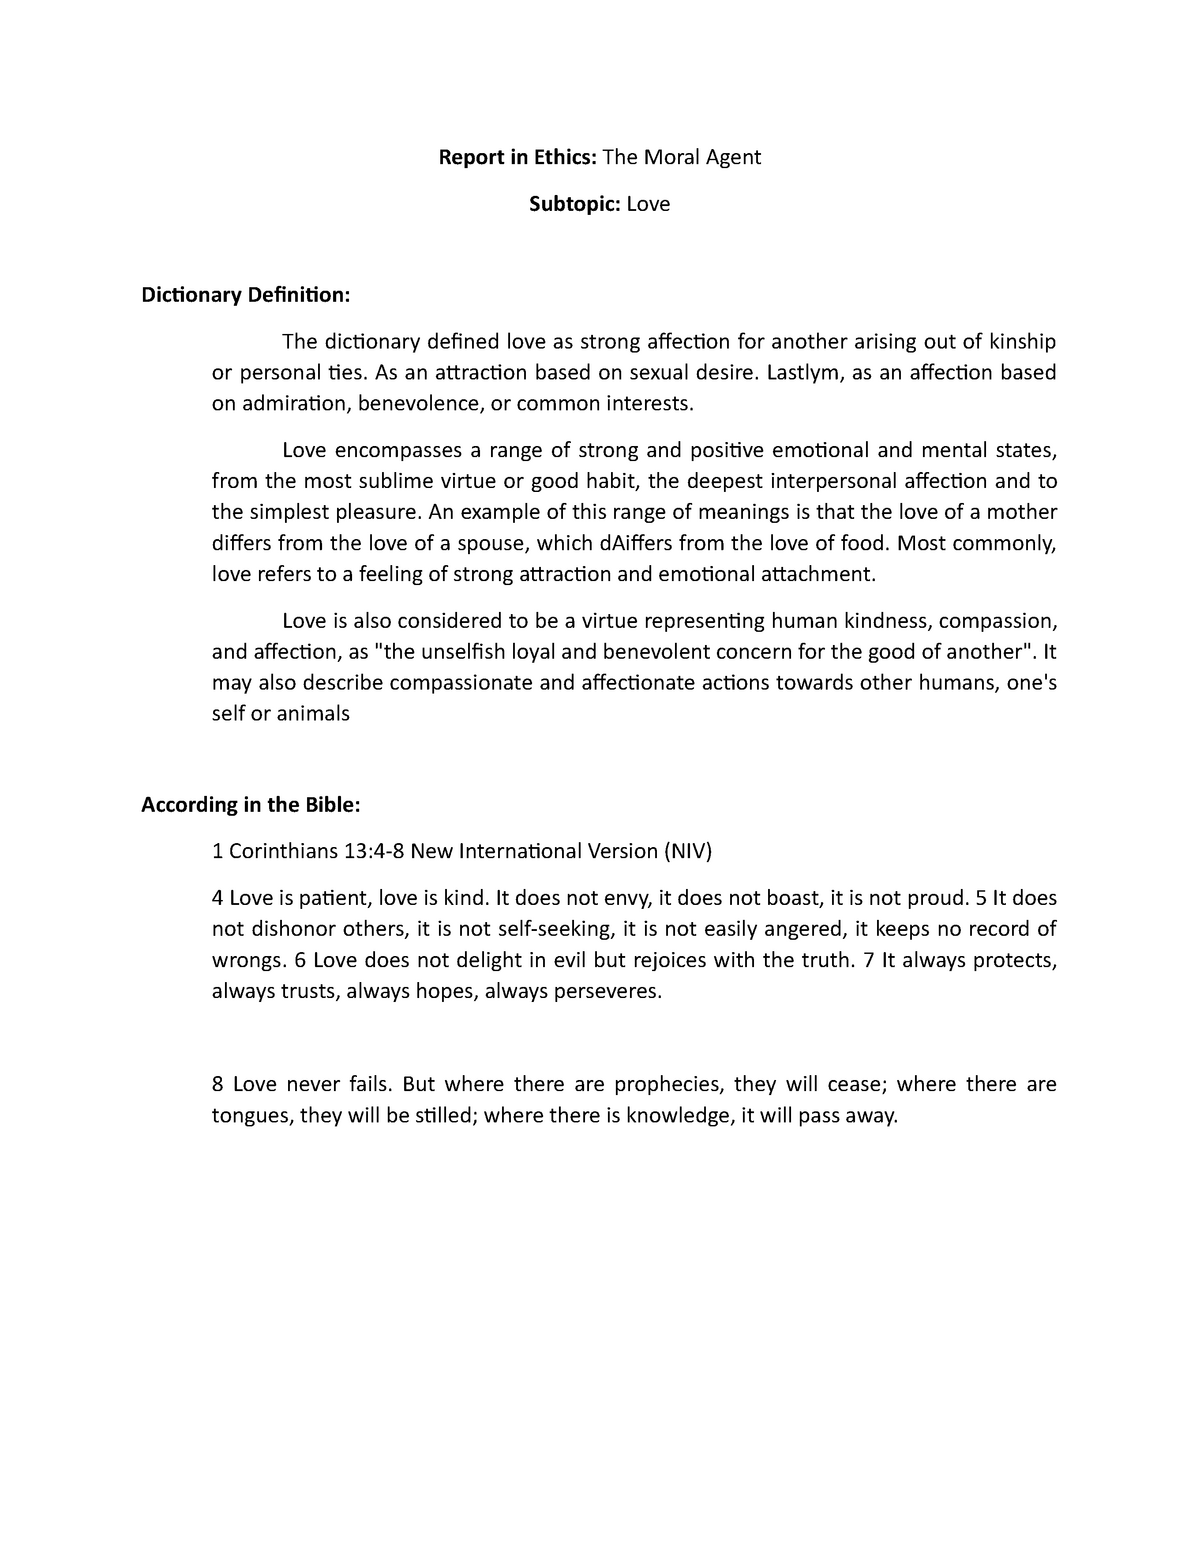 Love (Revised) - Definitions and theories of Love - Report in Ethics ...